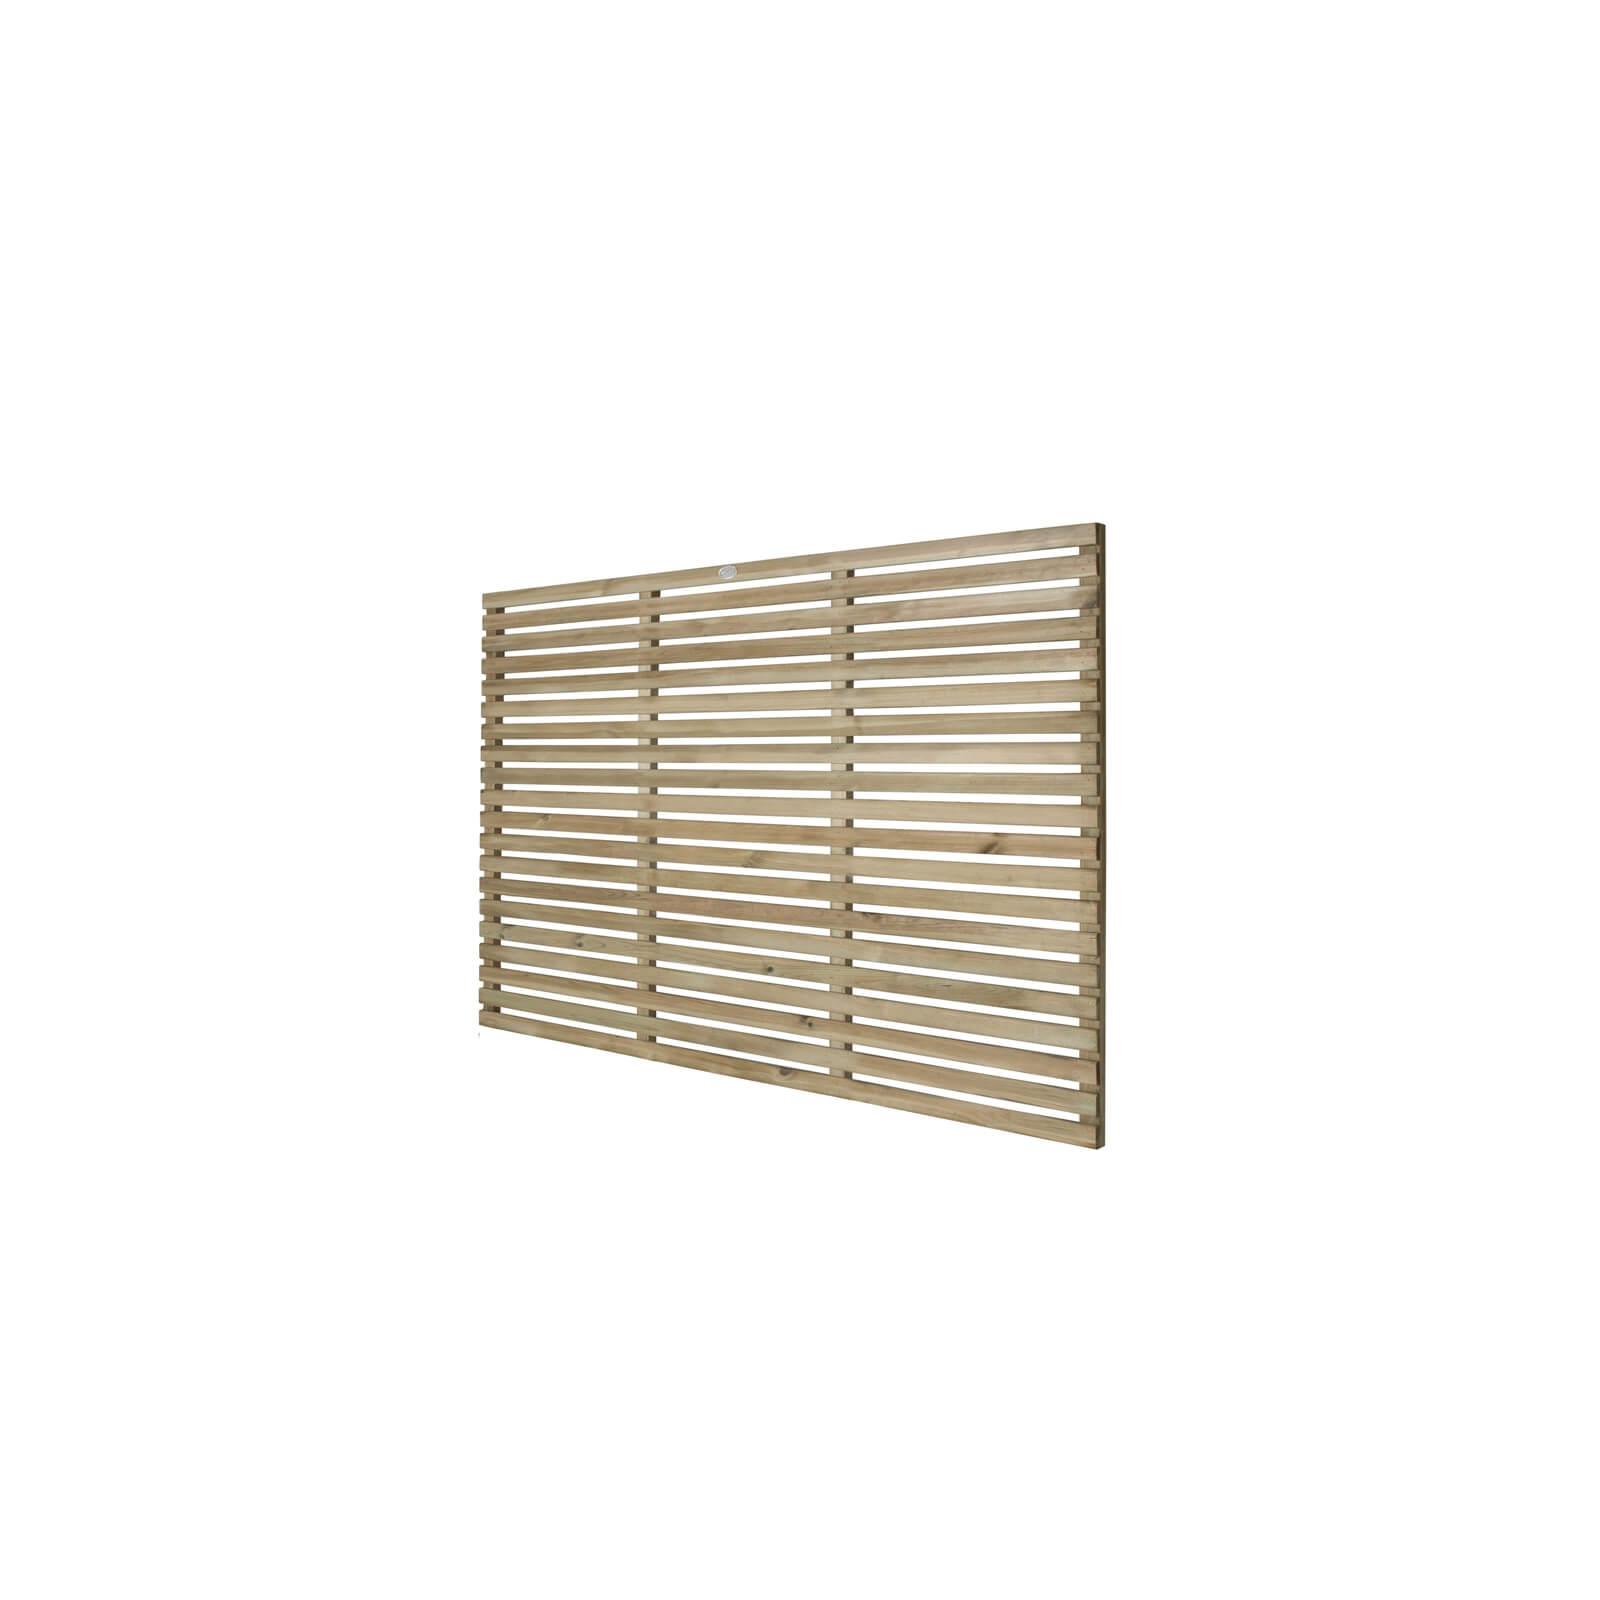 6ft x 4ft (1.8m x 1.2m) Pressure Treated Contemporary Slatted Fence Panel - Pack of 5